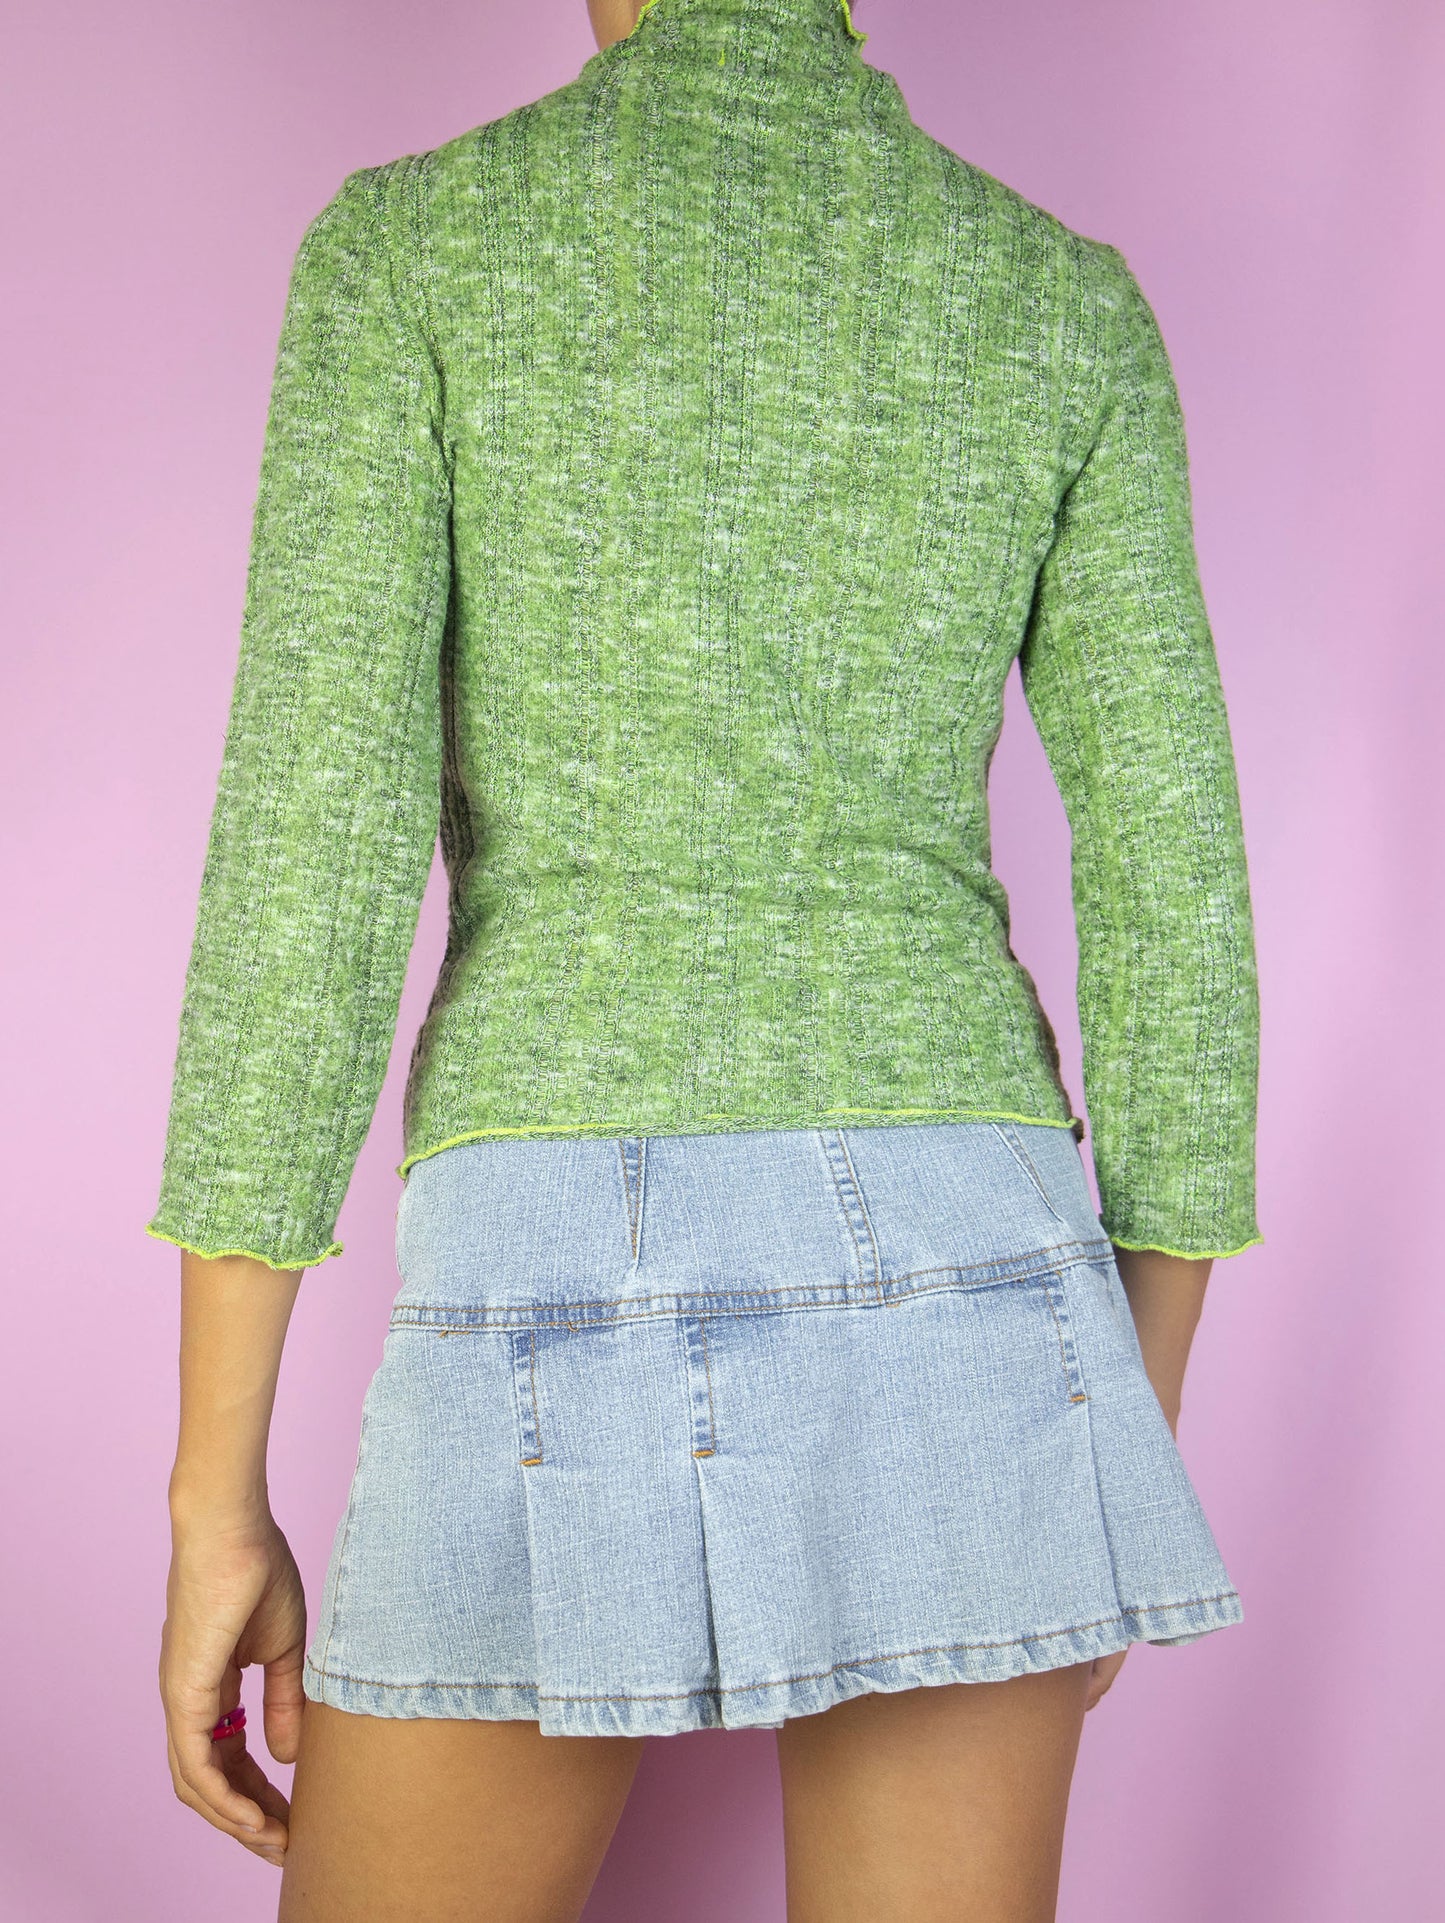 The Y2K Green Turtleneck Top is a vintage 2000s lightweight ribbed knit sweater with three-quarter sleeves.